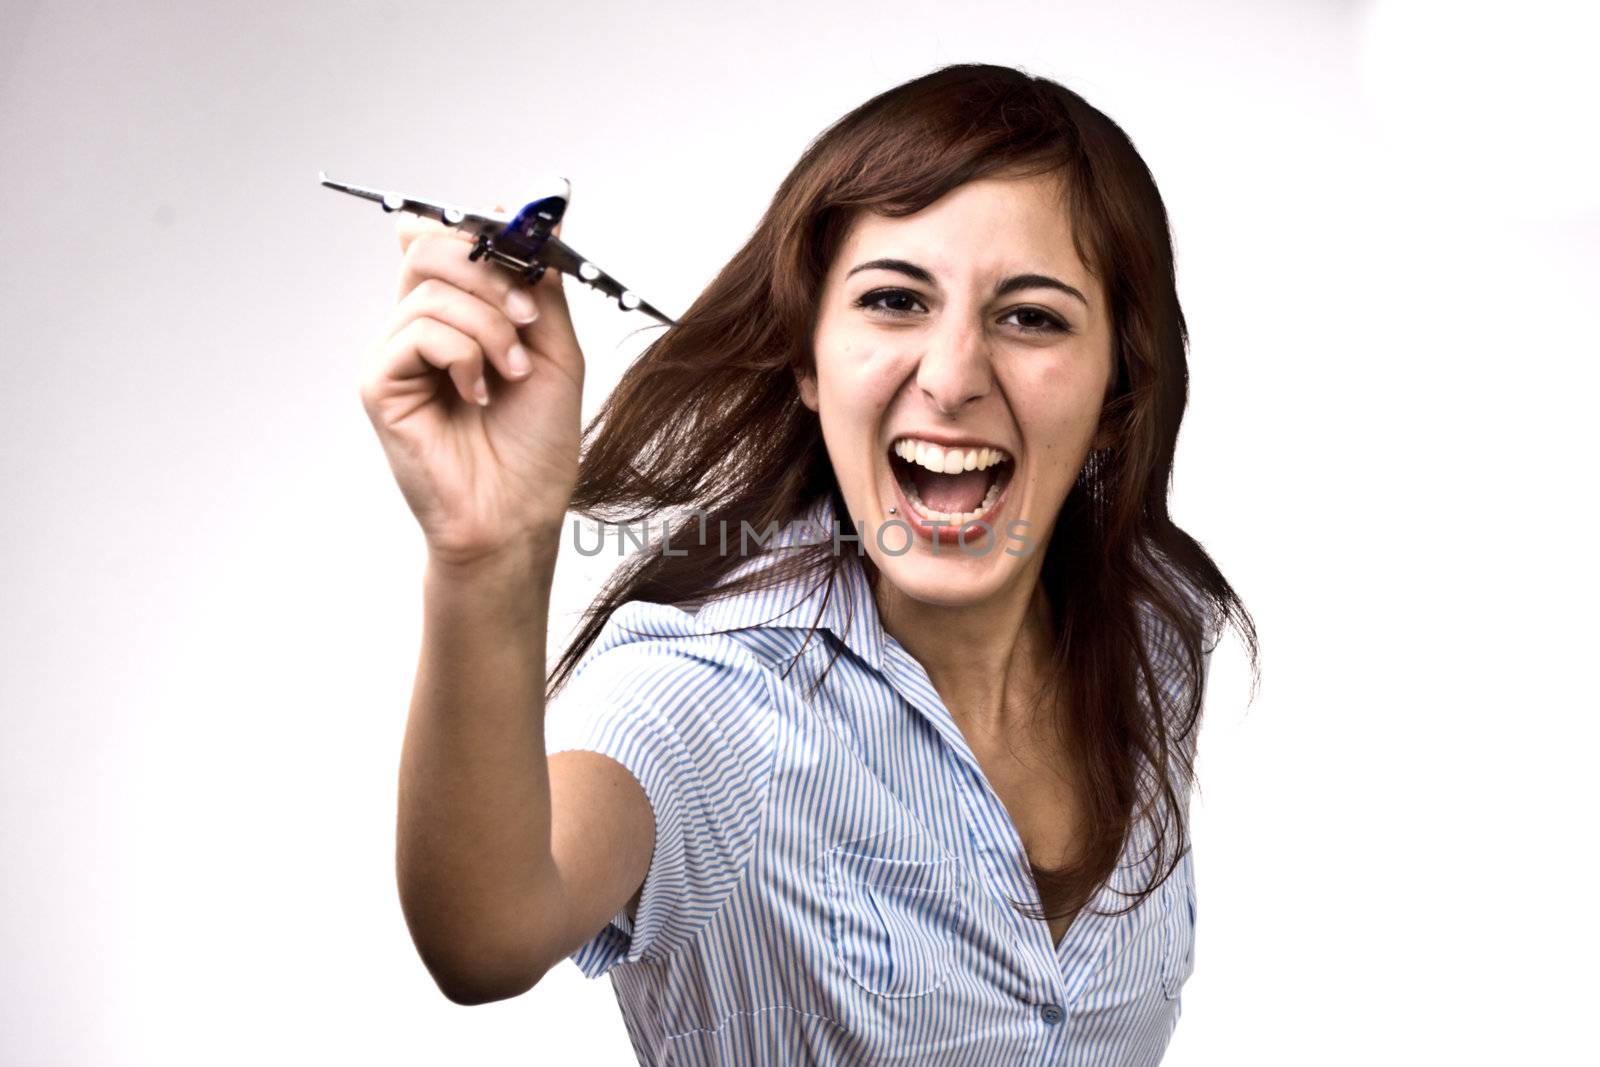 Photo Of A Cheerful Woman Launching A Miniature Plane Model